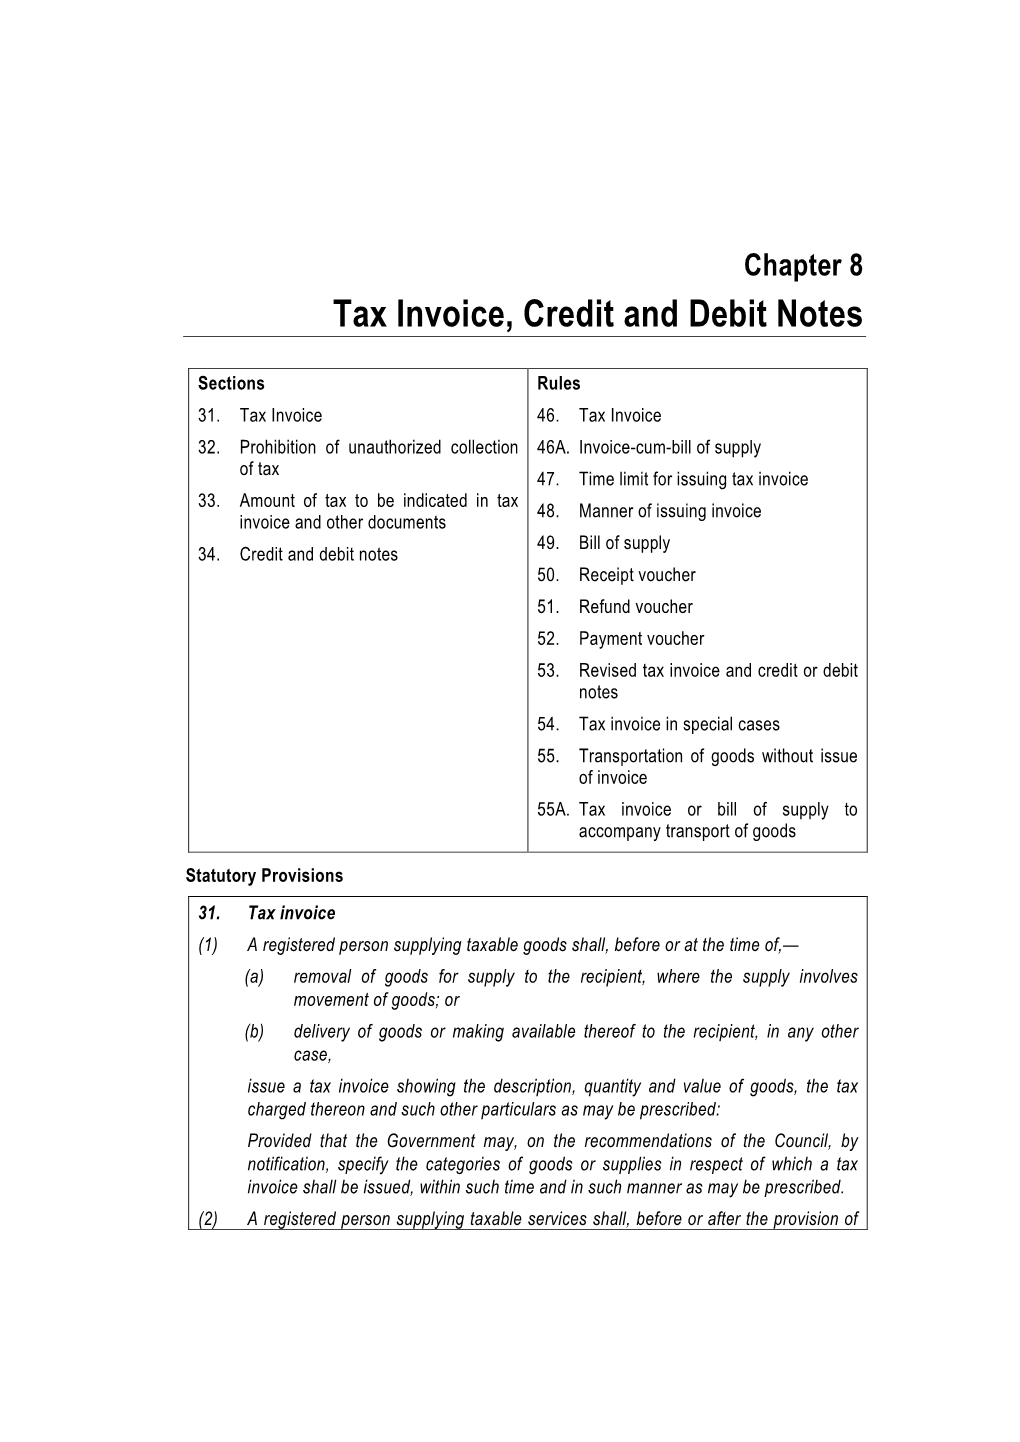 Tax Invoice, Credit and Debit Notes